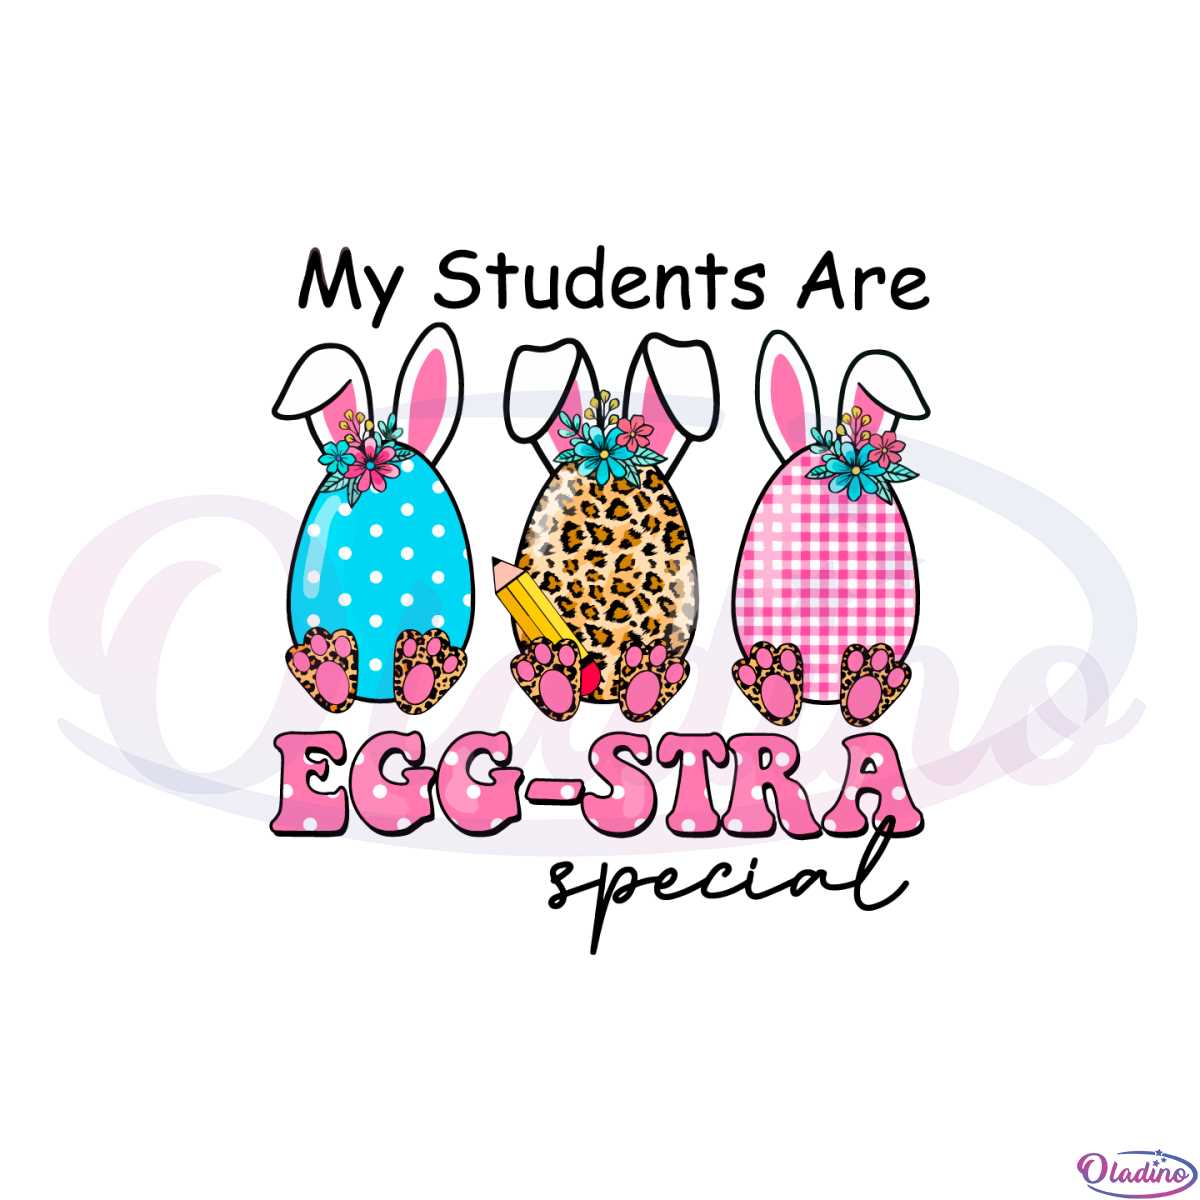 retro-easter-egg-bunny-my-students-are-egg-stra-special-png